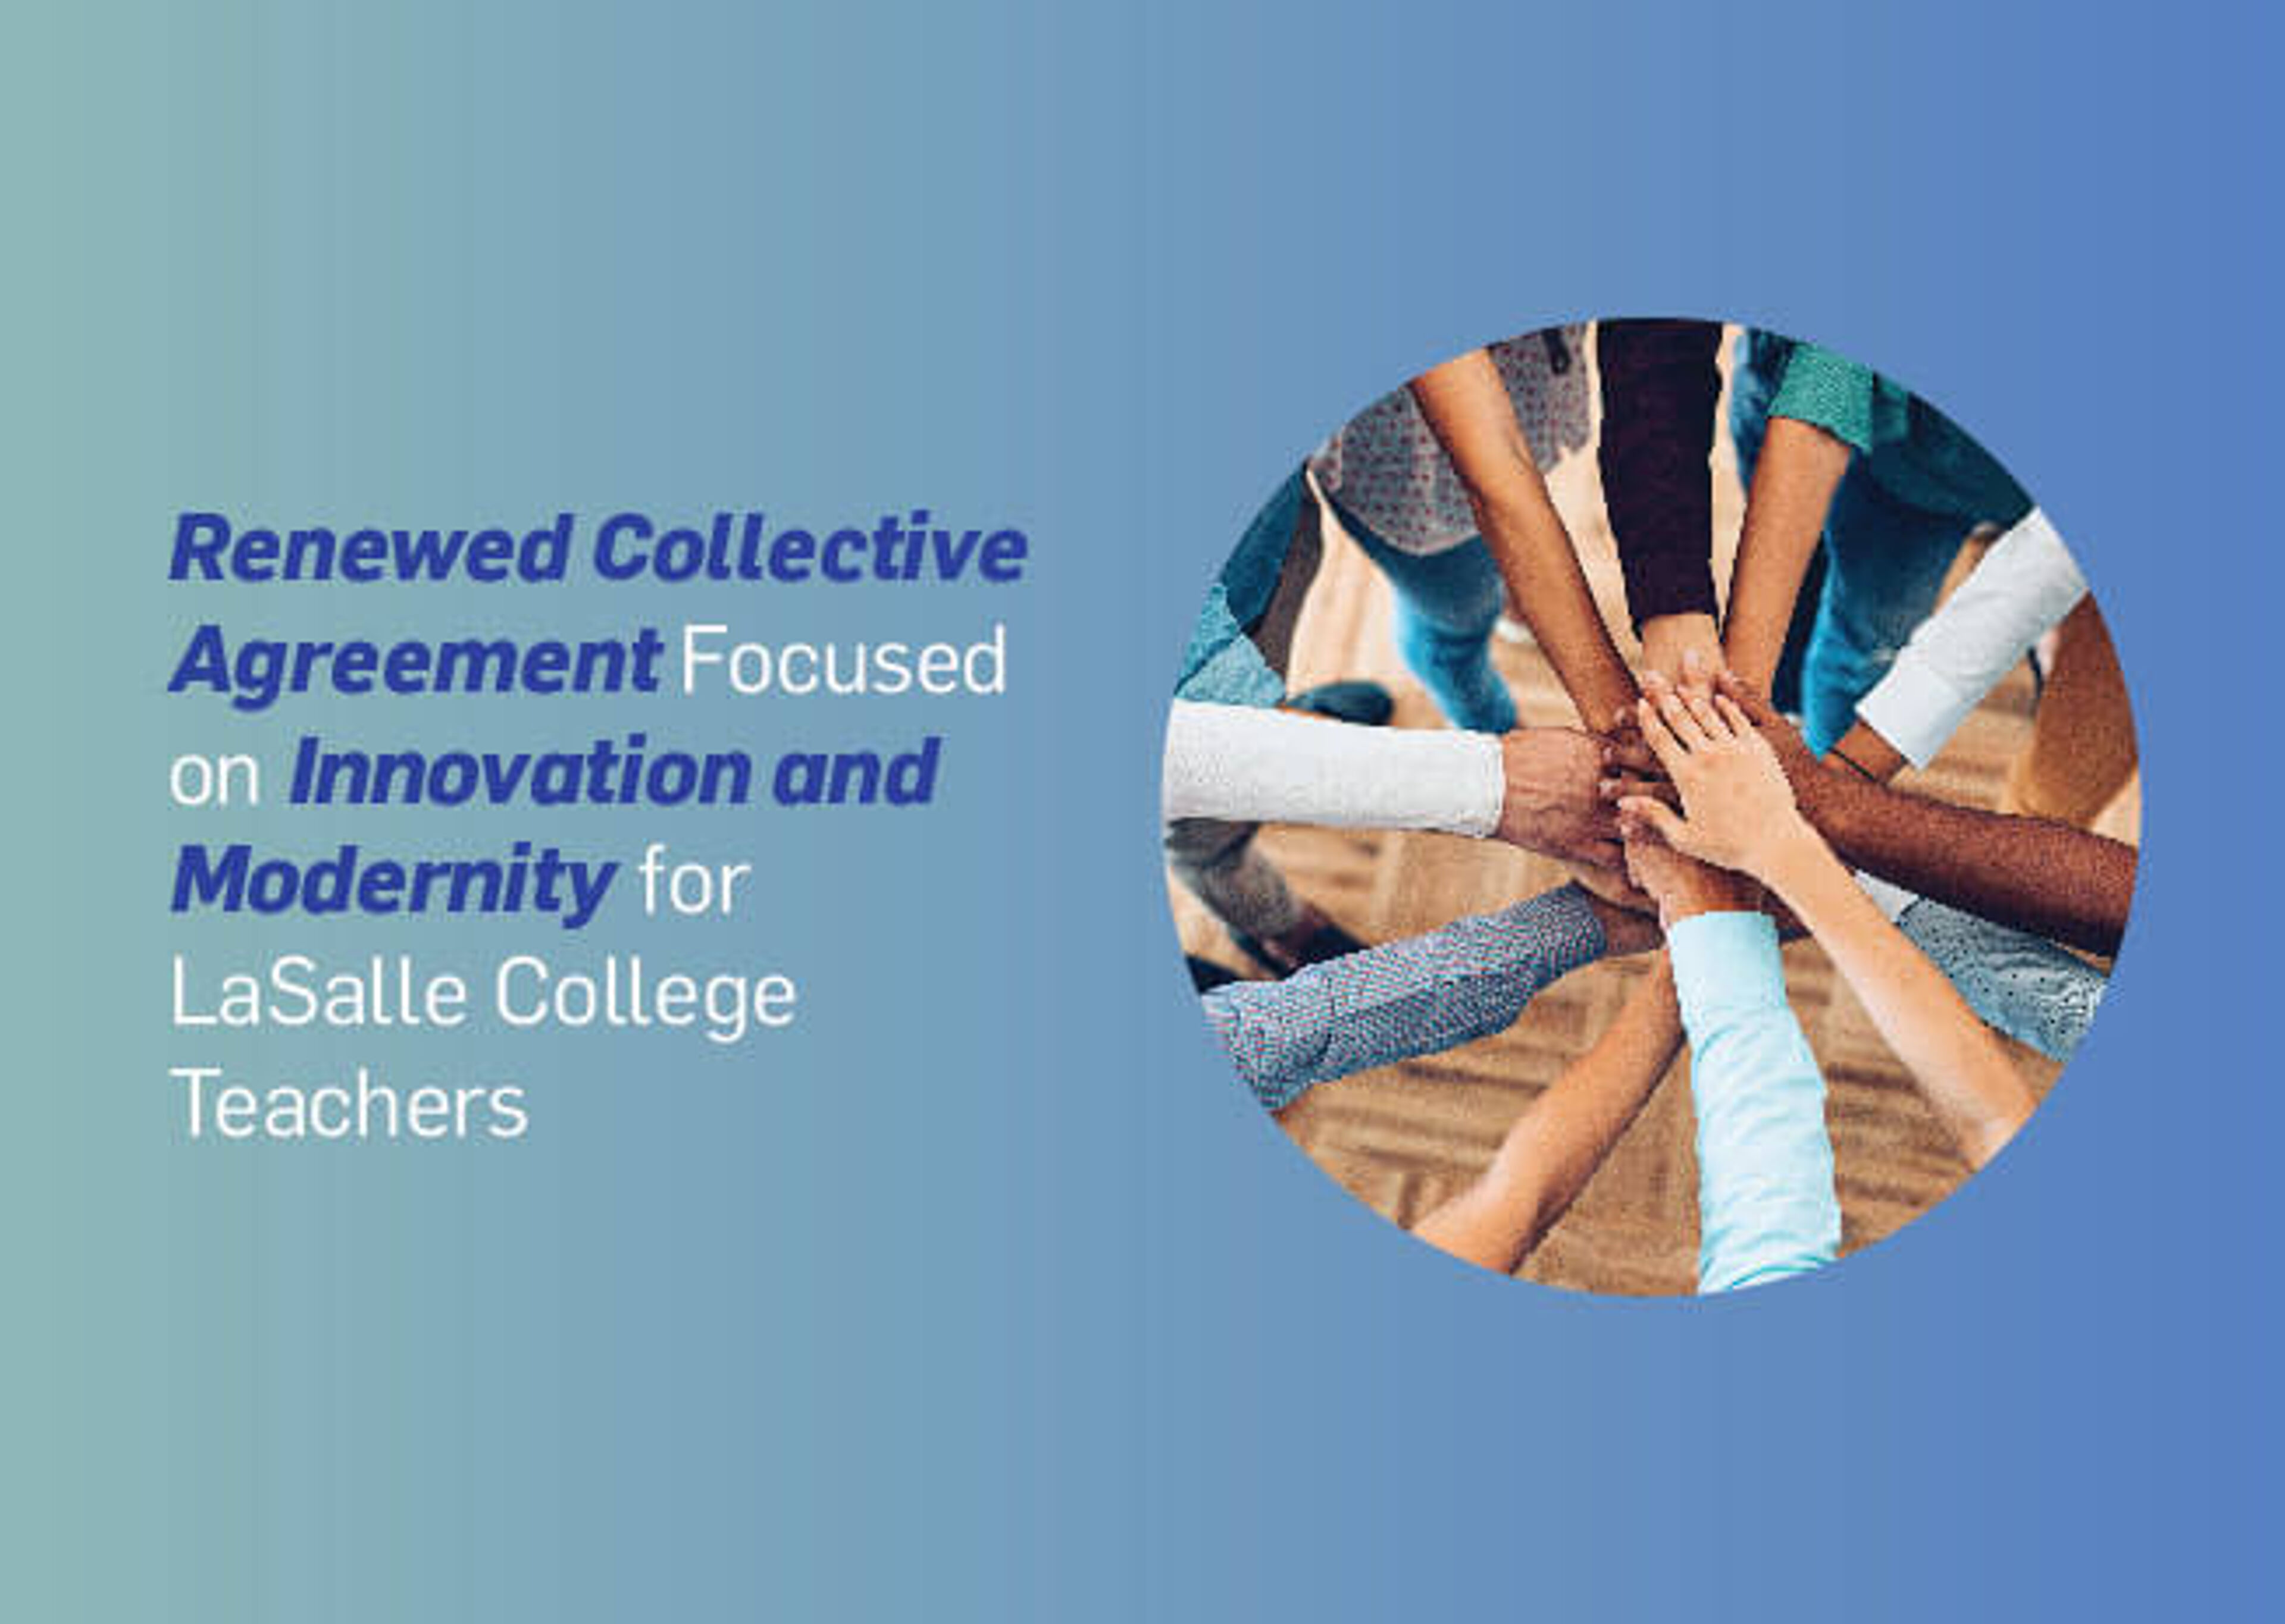 Hands together representing the renewed collective agreement at LaSalle College, emphasizing innovation and modernity.